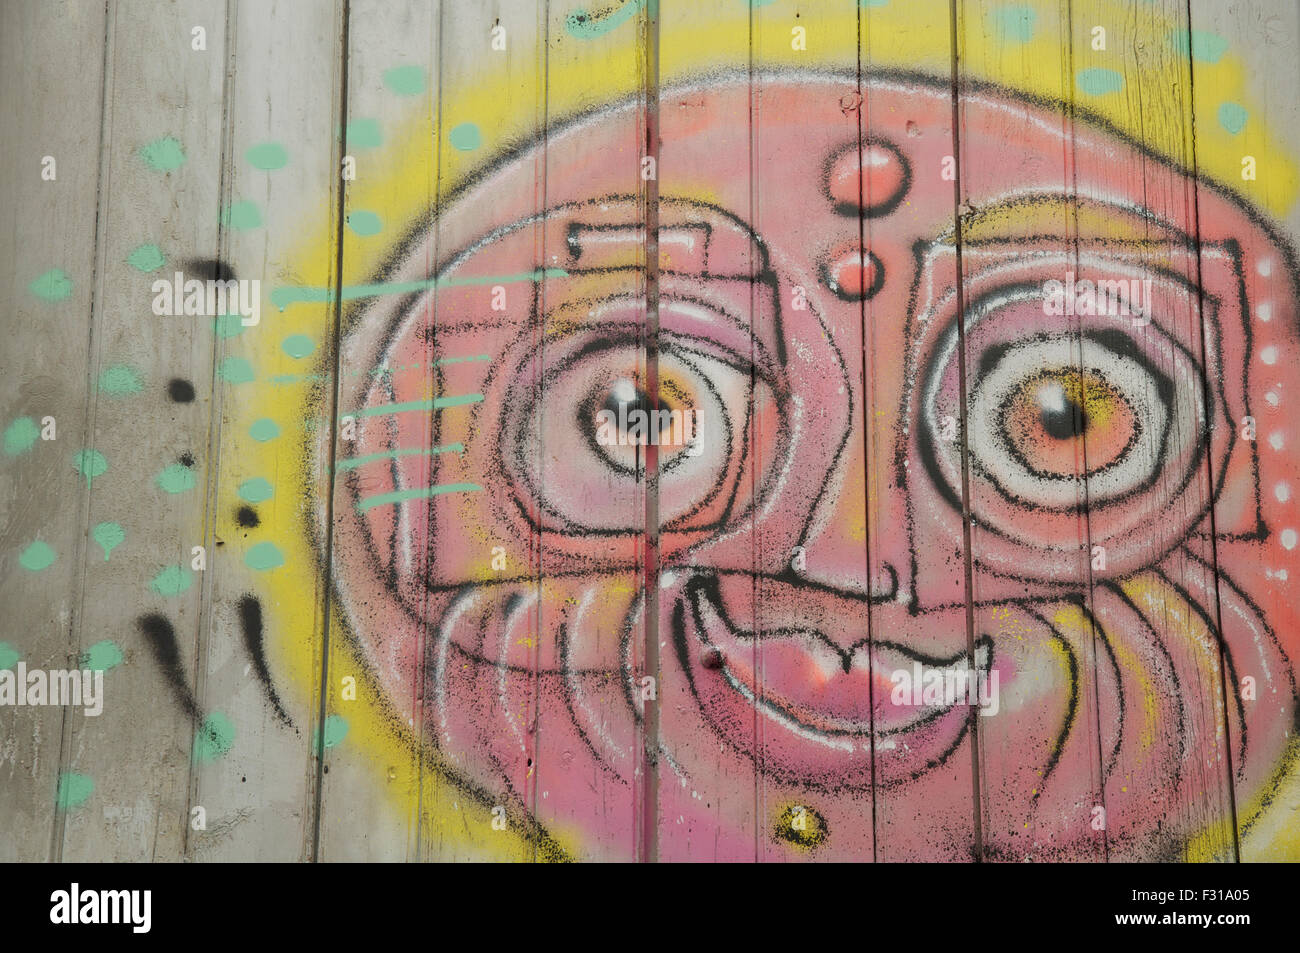 Detail of street art. Colourful graffiti of a sunny smiling face painted on a window shutter by the artist known as Loko. Montpellier, South of France. Stock Photo